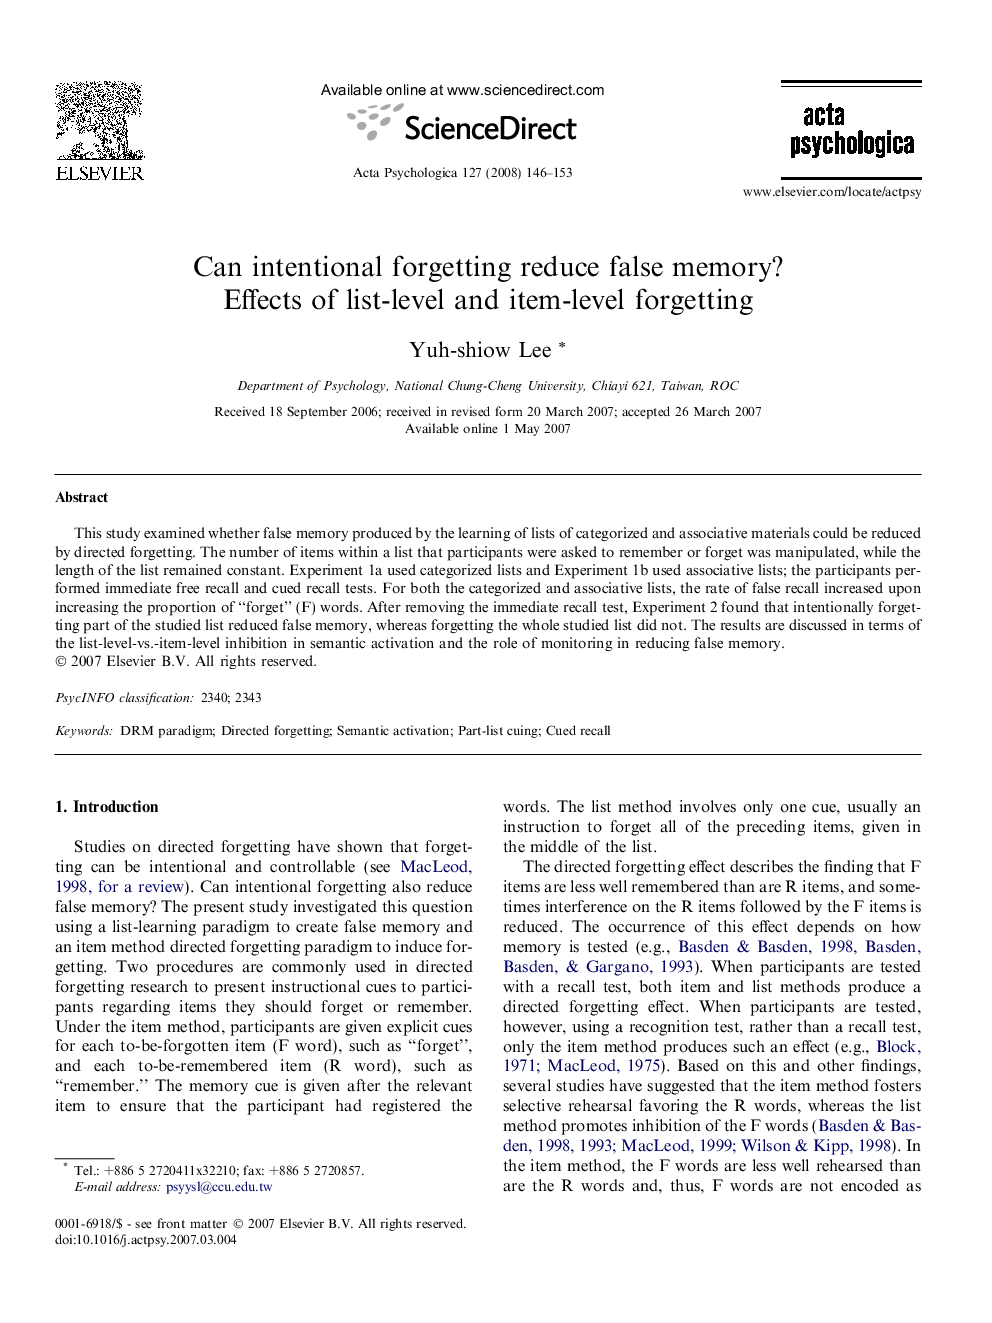 Can intentional forgetting reduce false memory? Effects of list-level and item-level forgetting